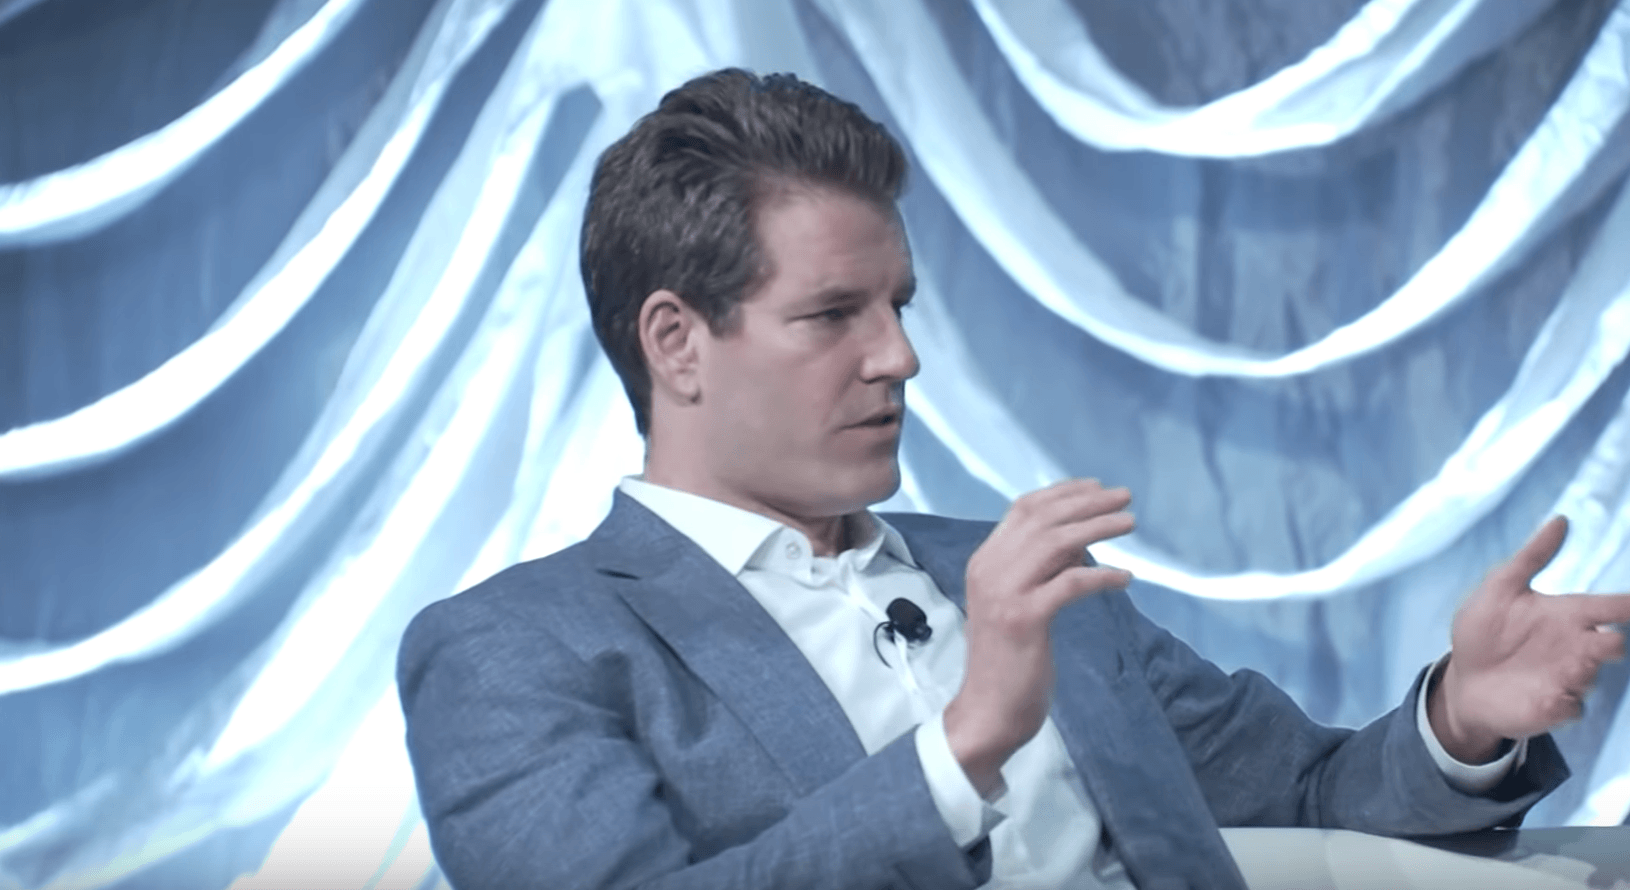 Gemini CEO Tyler Winklevoss Criticizes Biden-Harris Administration’s Approach to Crypto Industry